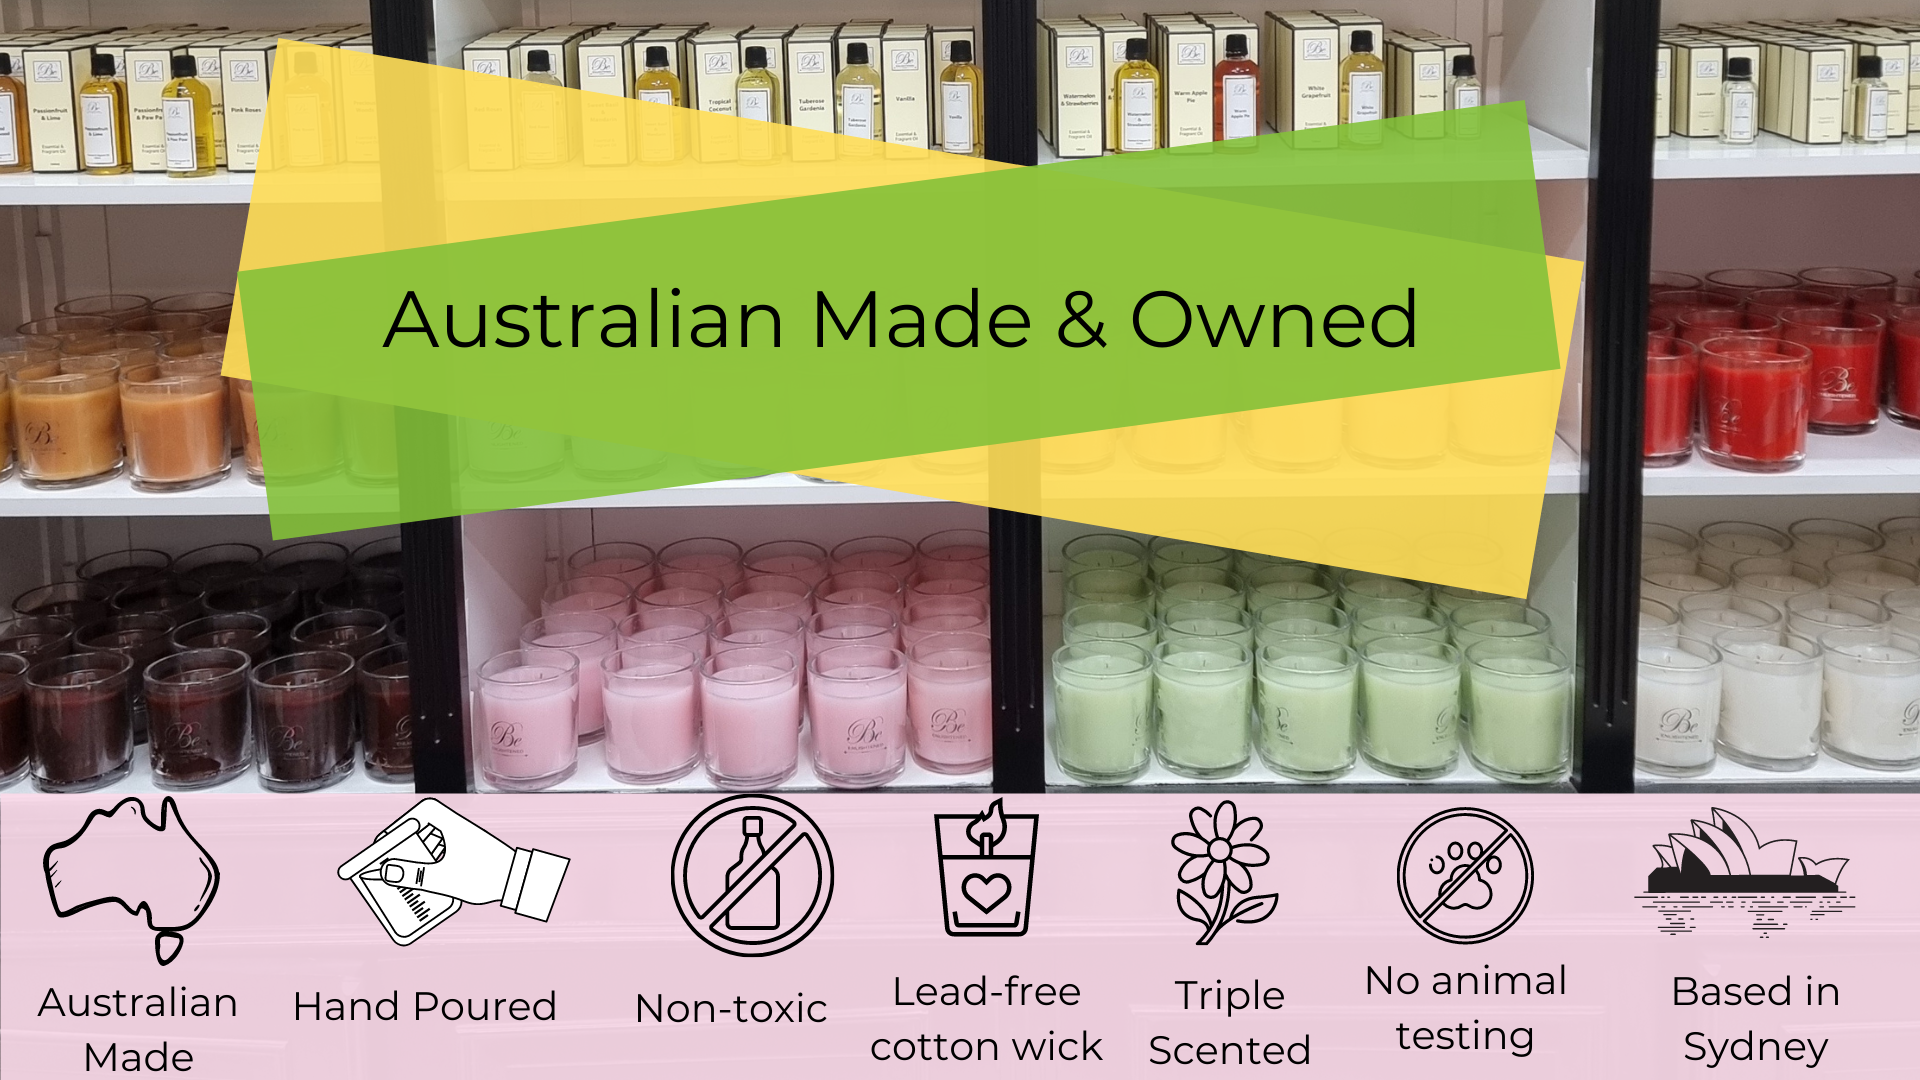 Colourful candles displayed with a green and gold overlay in the middle with the text 'Australian Made & Owned' At the bottom of the image shows an icon for Australian Made, Hand Poured, No Toxins, Aluminium free cotton wicks, triple scented, not tested on animals and Sydney based.